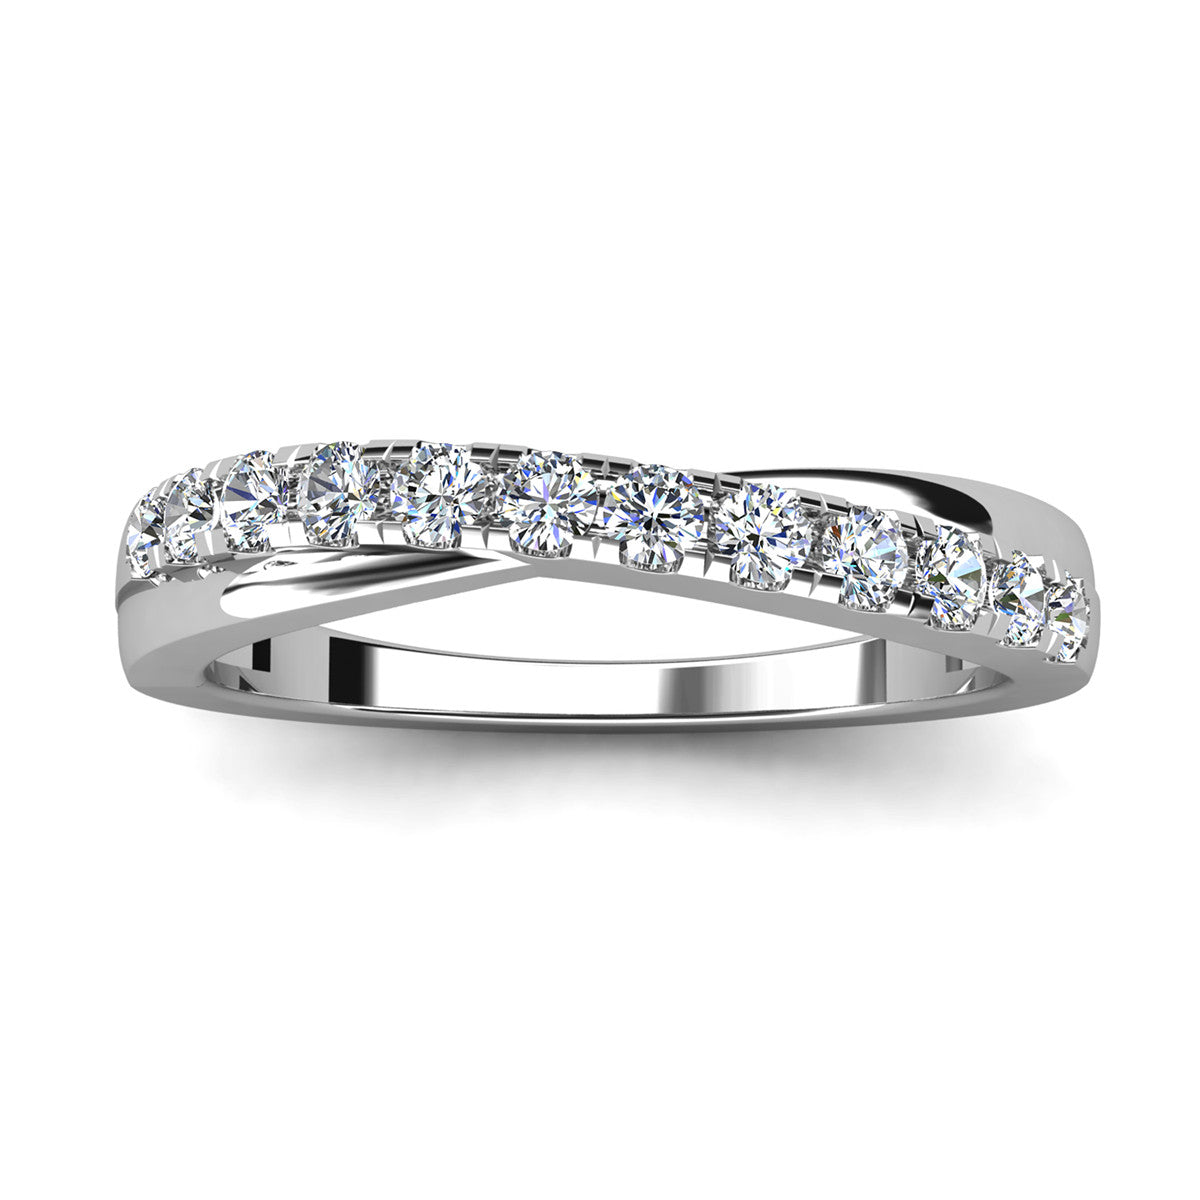 Moissanite by Cate & Chloe Emerson Sterling Silver Ring with Moissanite and 5A Cubic Zirconia Crystals